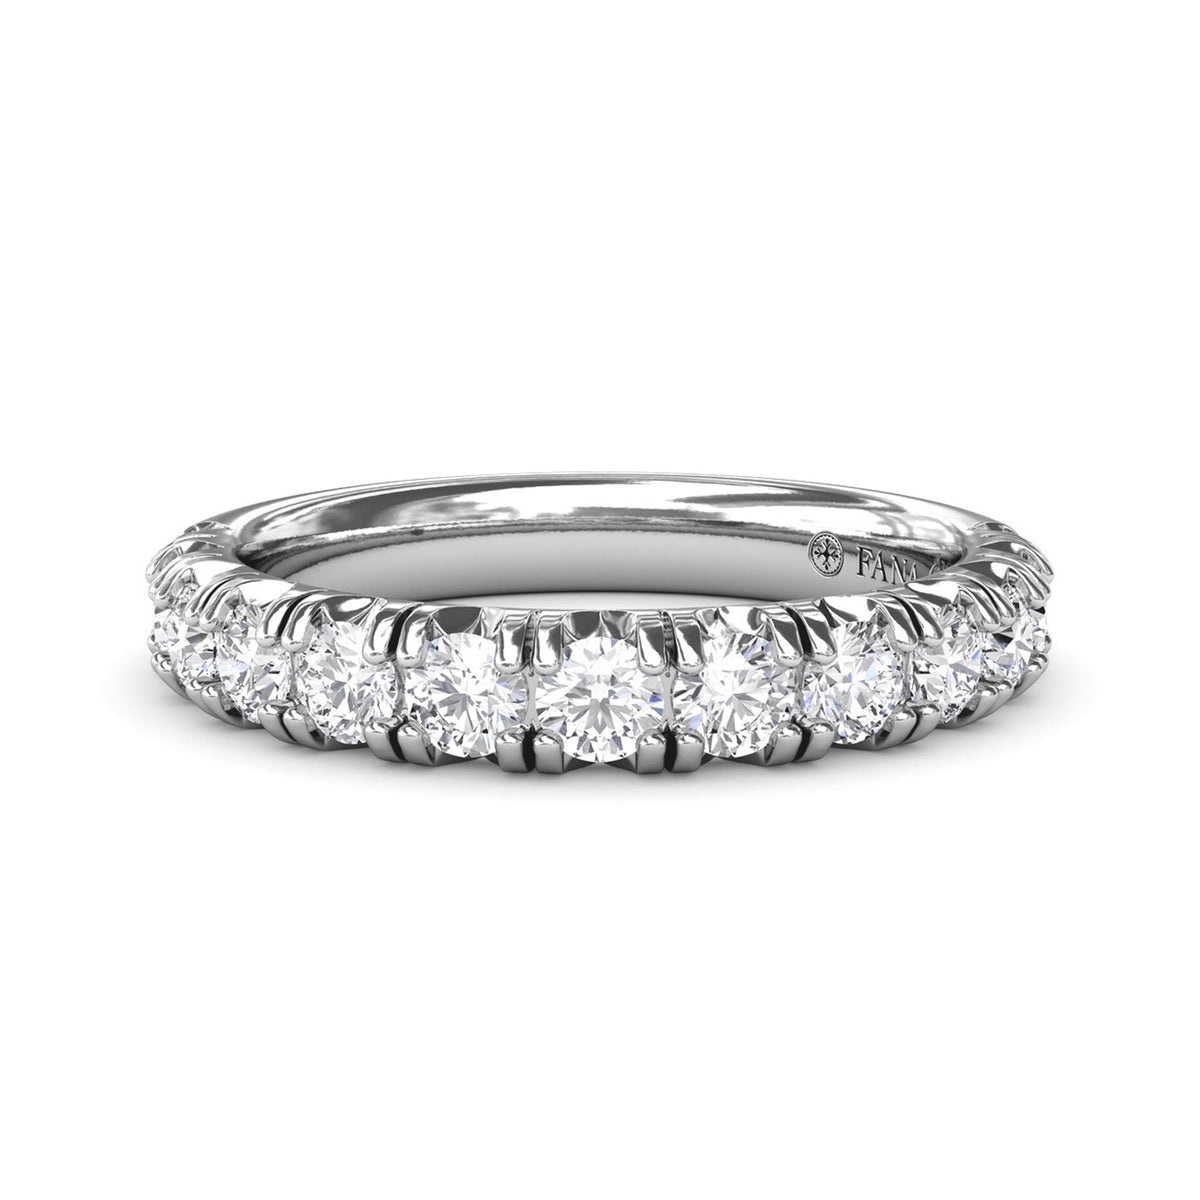 14Kt White Gold Prong Set Wedding Ring With 0.91cttw Natural Diamonds